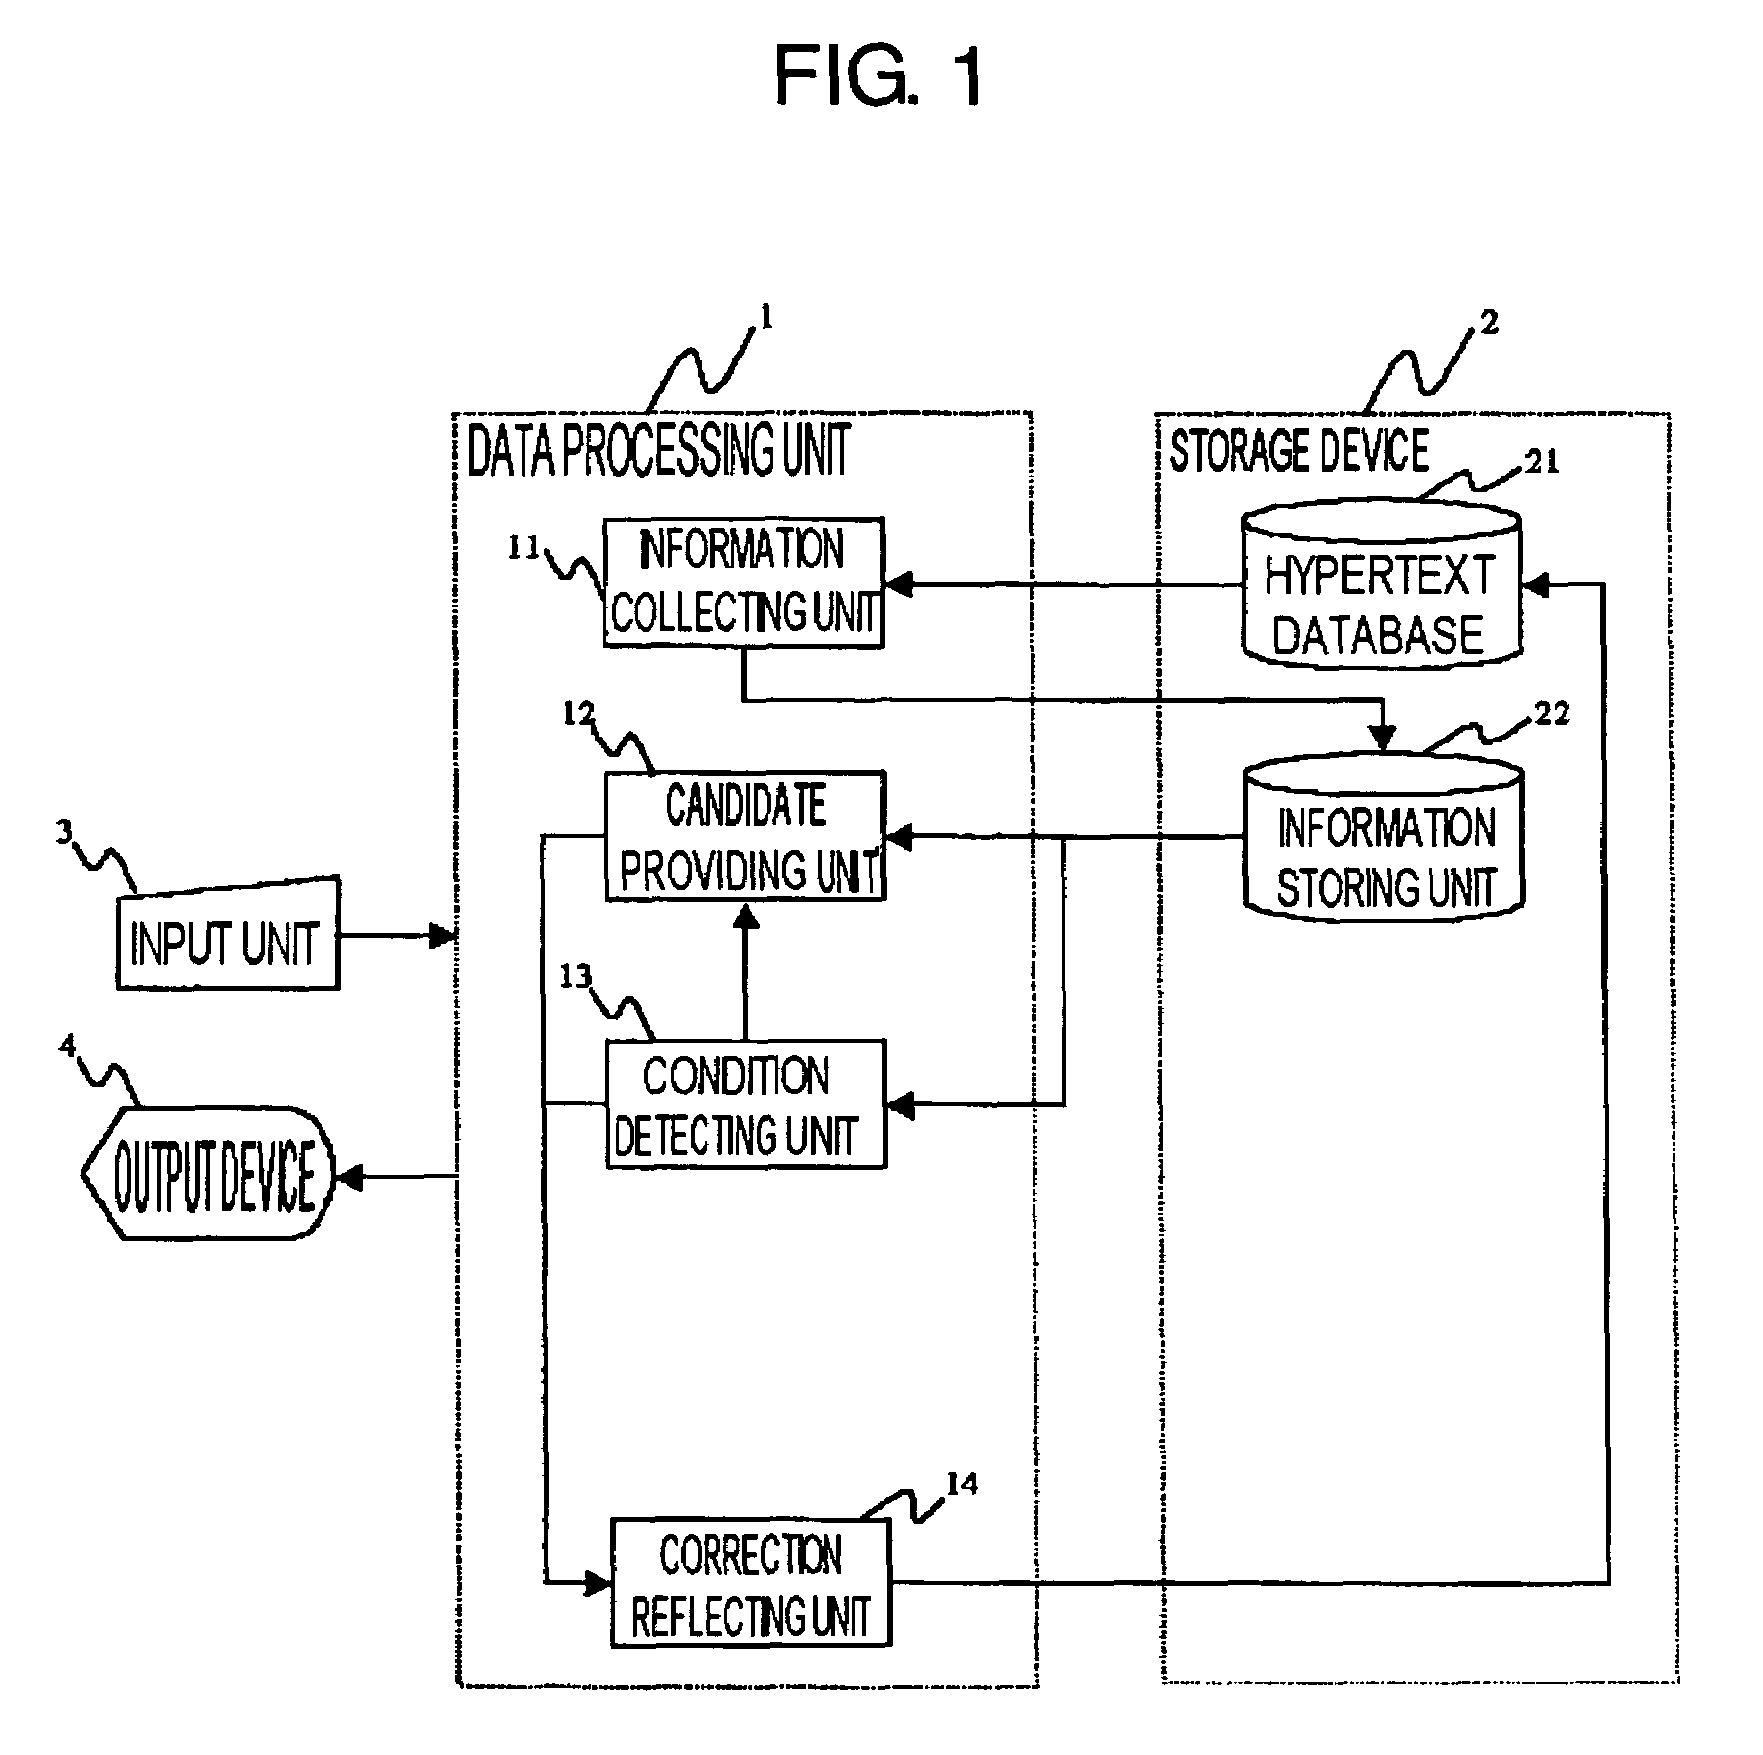 Apparatus, method, and computer program product for checking hypertext